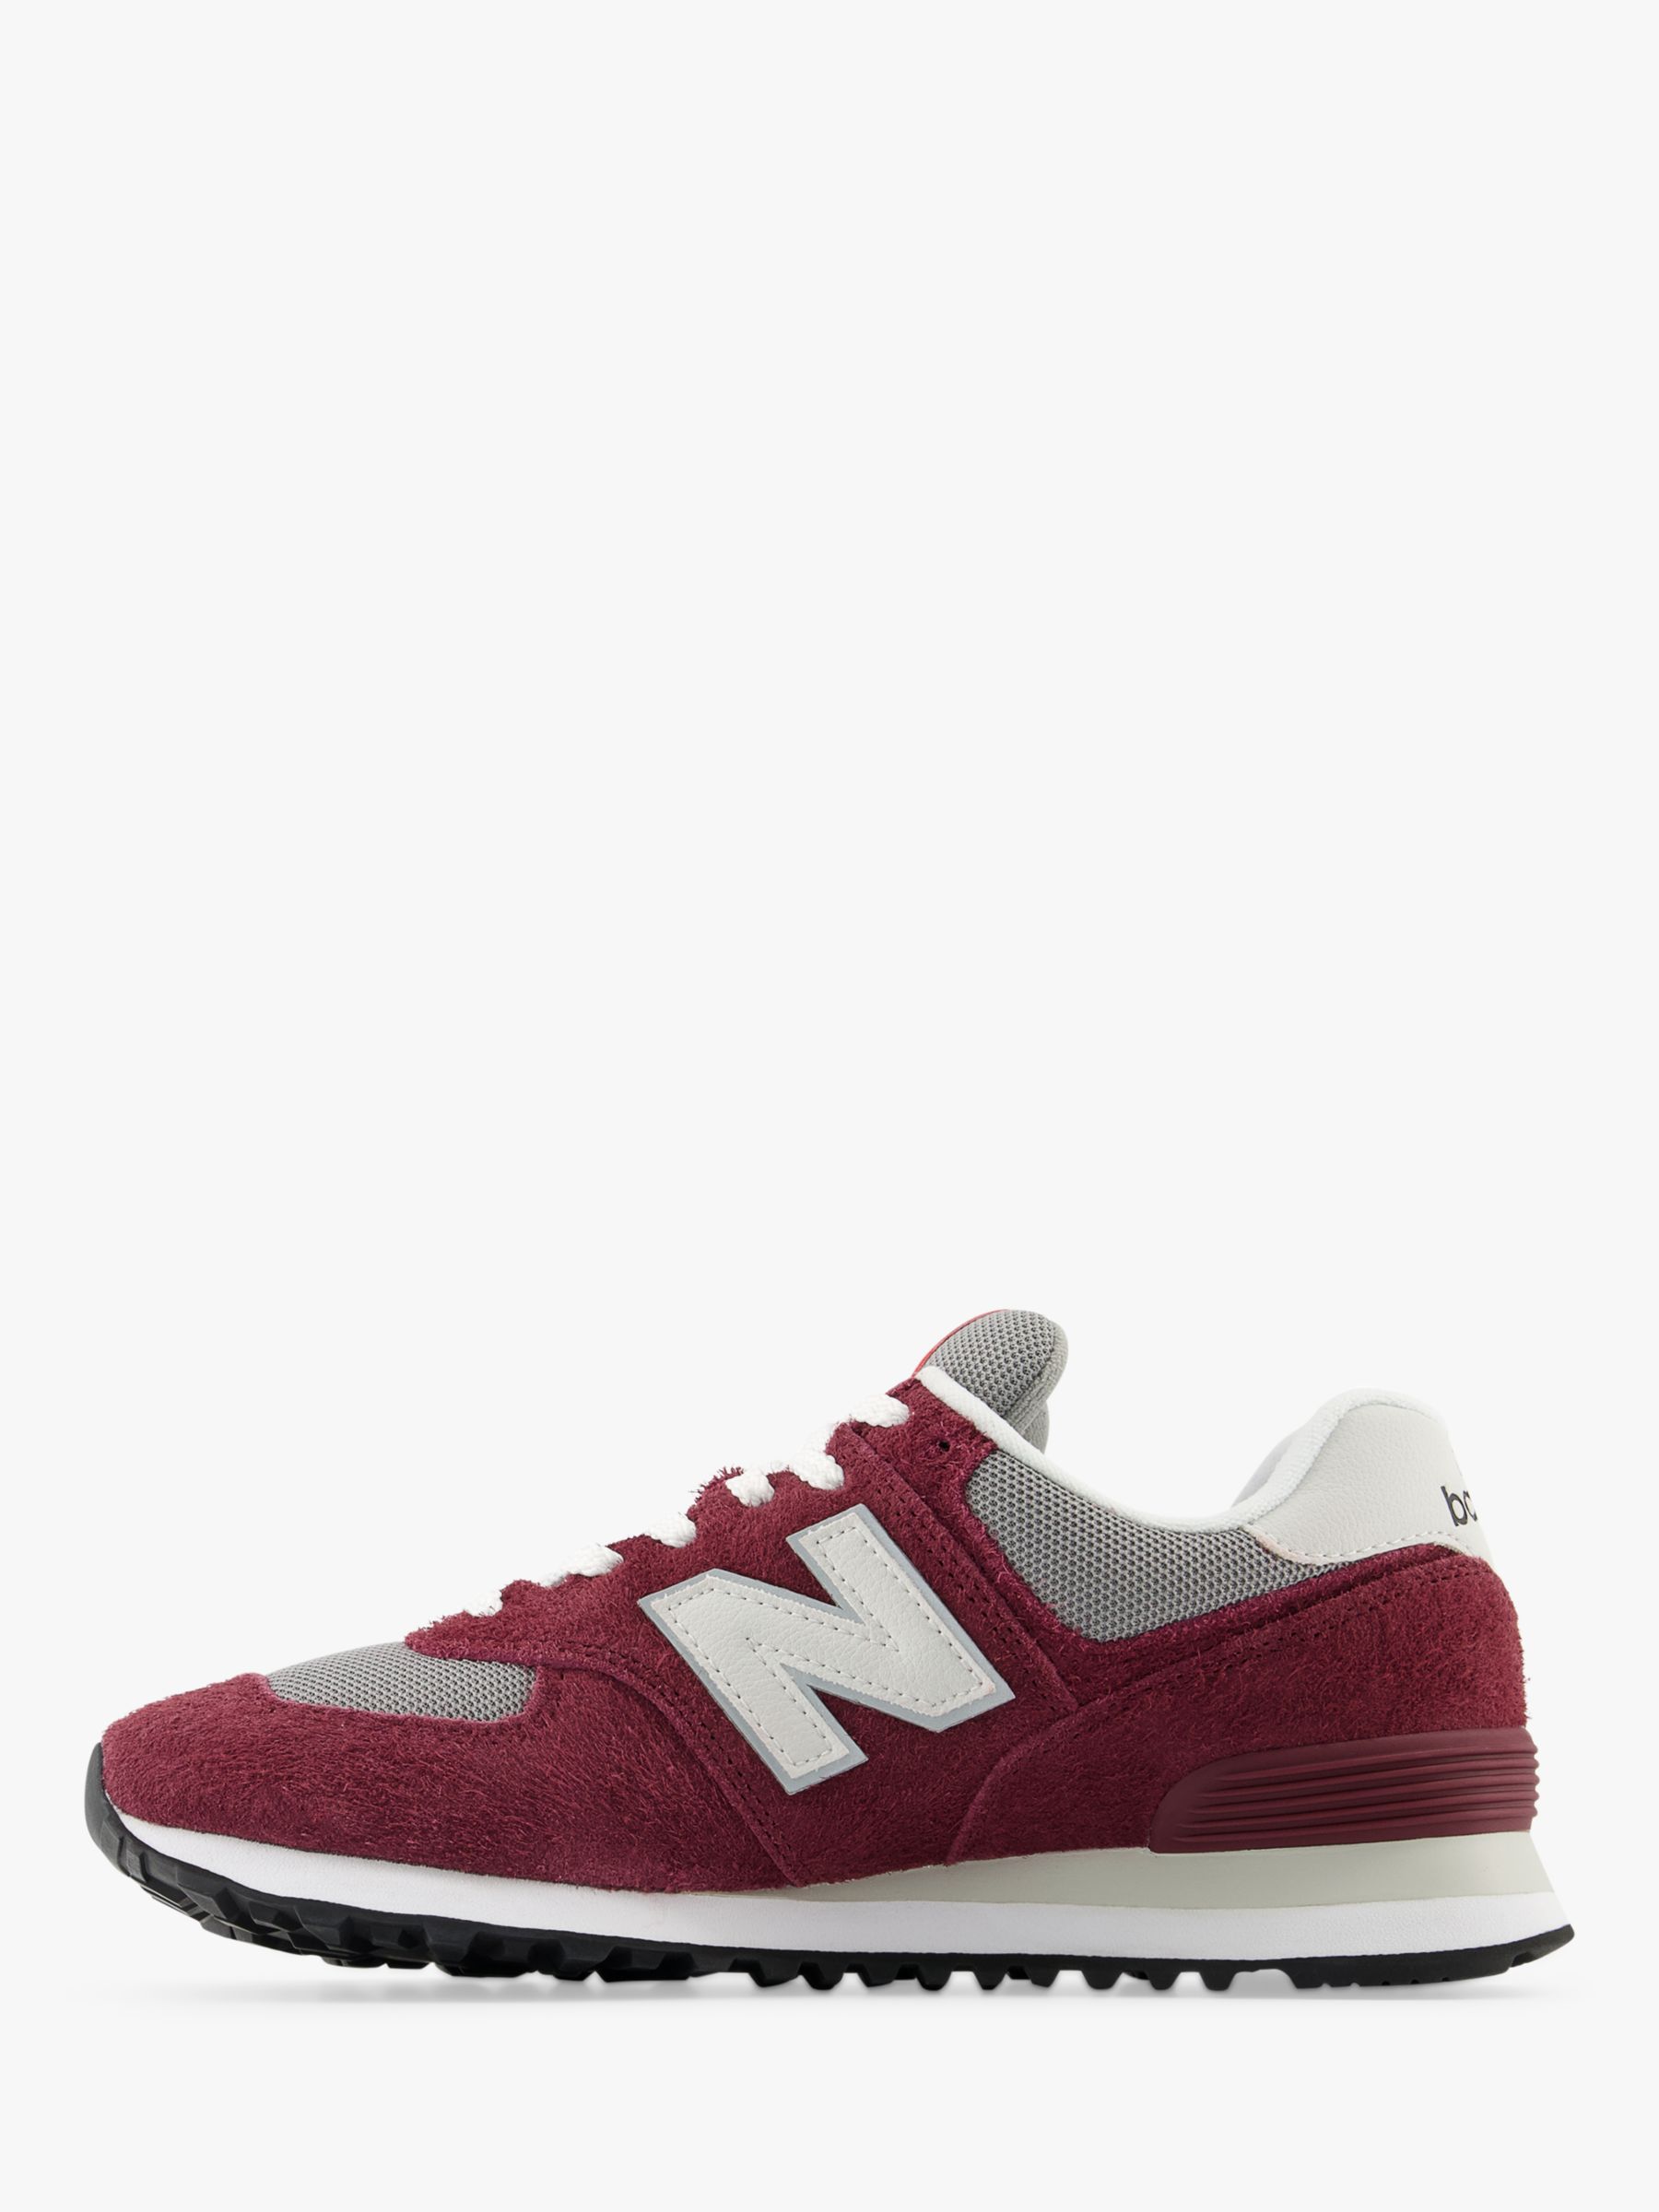 Buy New Balance 574 Suede Trainers, Red/Grey Online at johnlewis.com